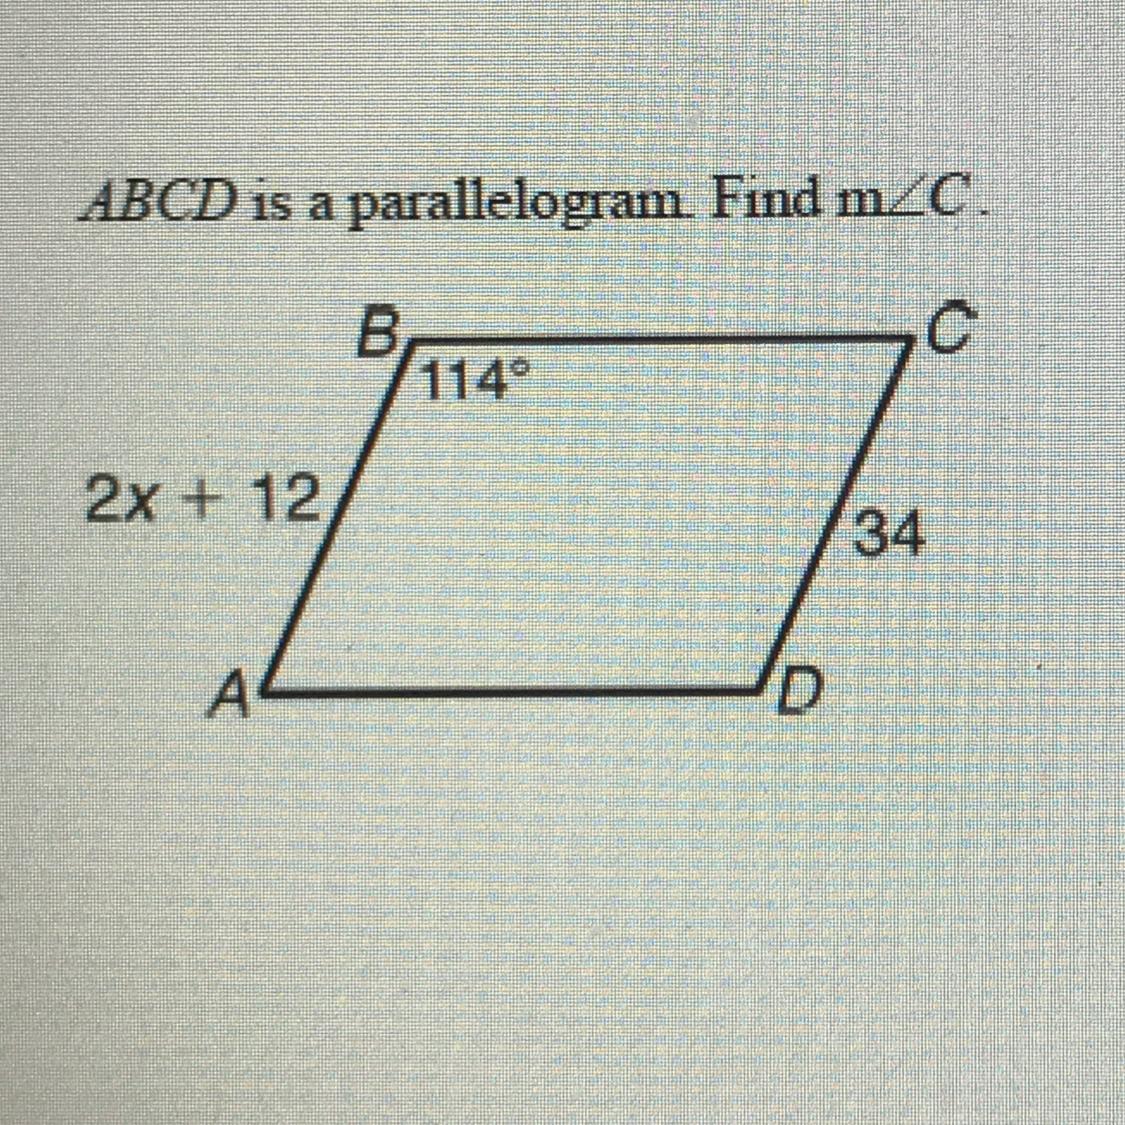 ABCD Is A Parallelogram Find M Angle C.,11492x + 1234A4